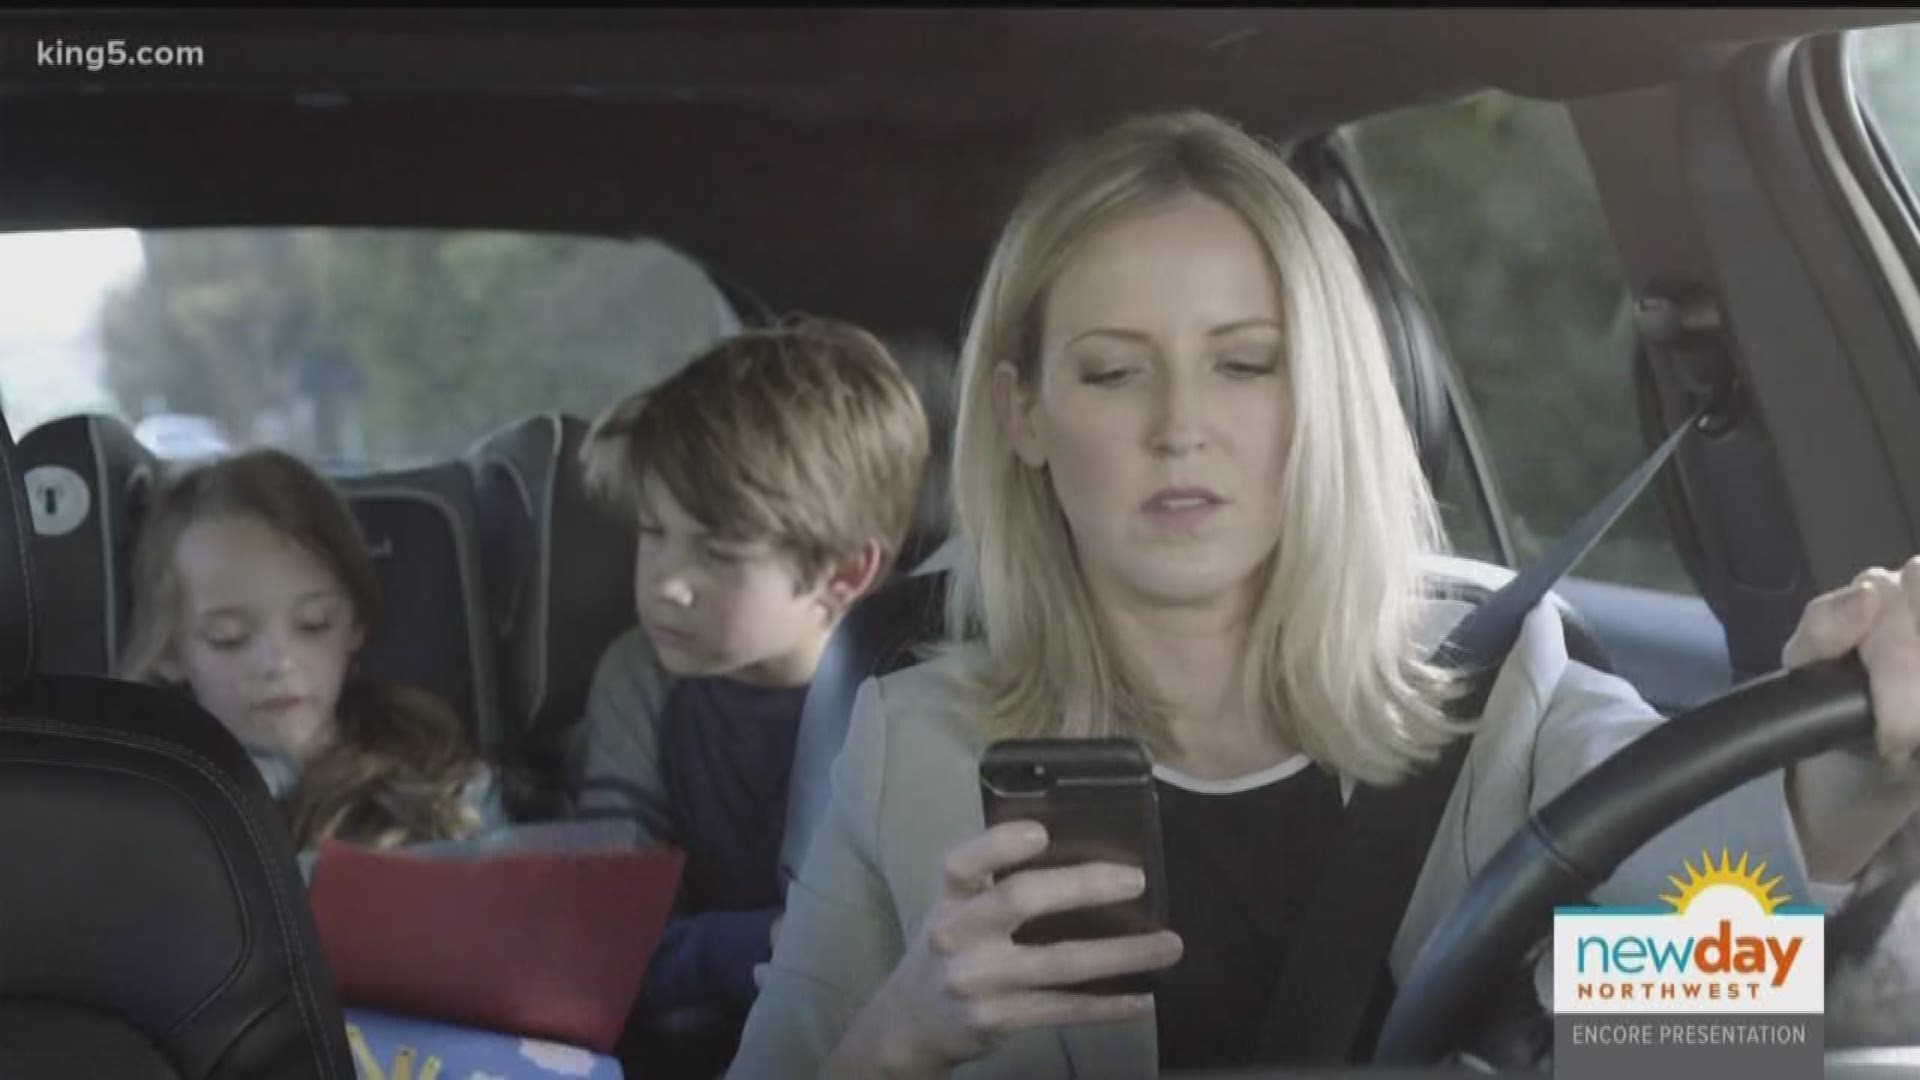 AAA's newest anti-distracted driving campaign uses research to effectively address illegal behavior behind the wheel. Sponsored by AAA.